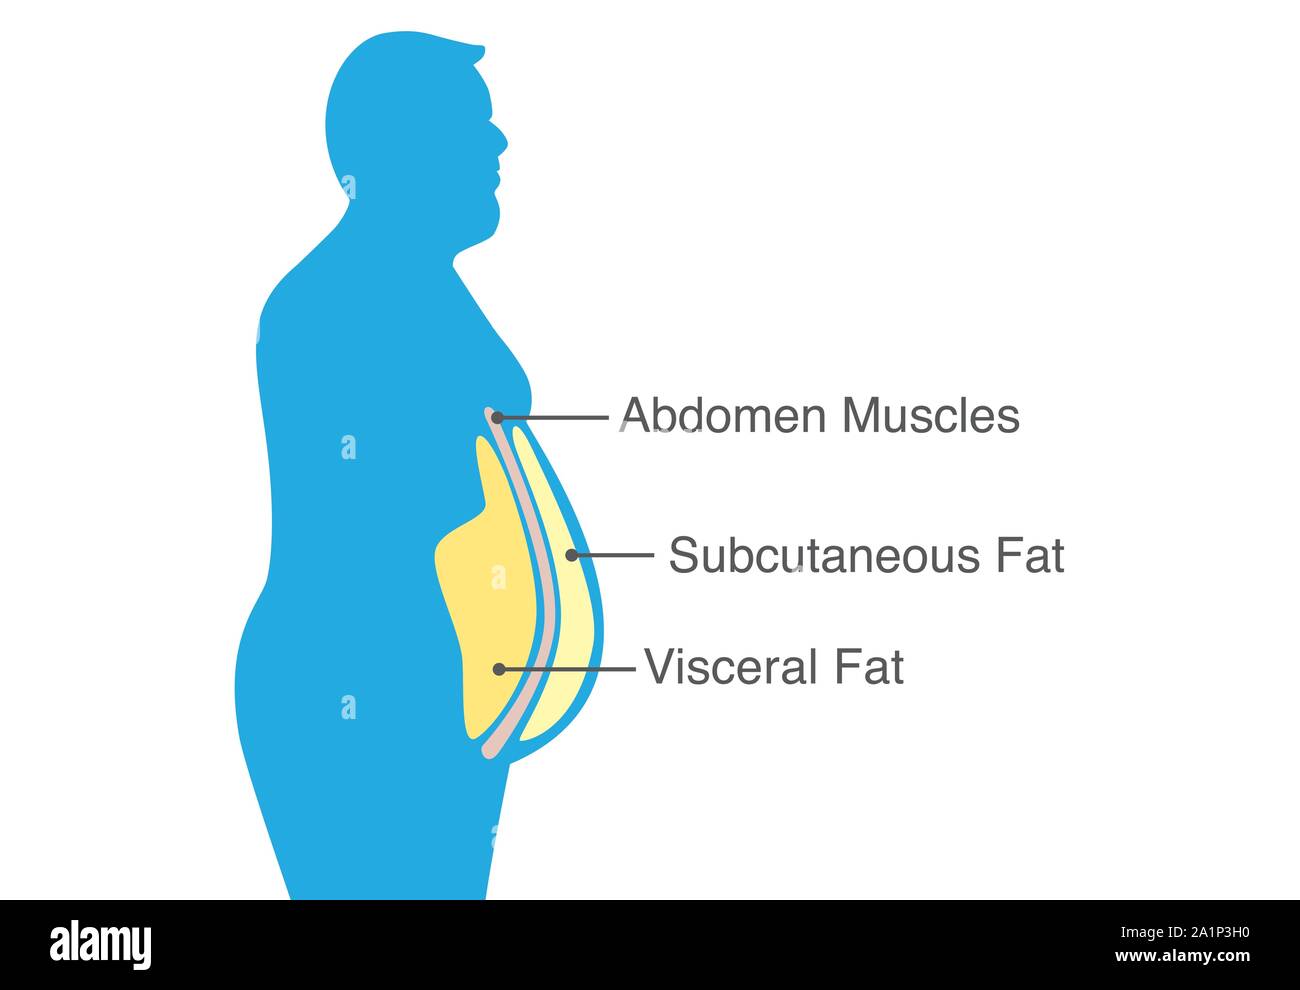 Visceral fat and subcutaneous fat that accumulate around your waistline. Illustration about medical diagram. Stock Vector